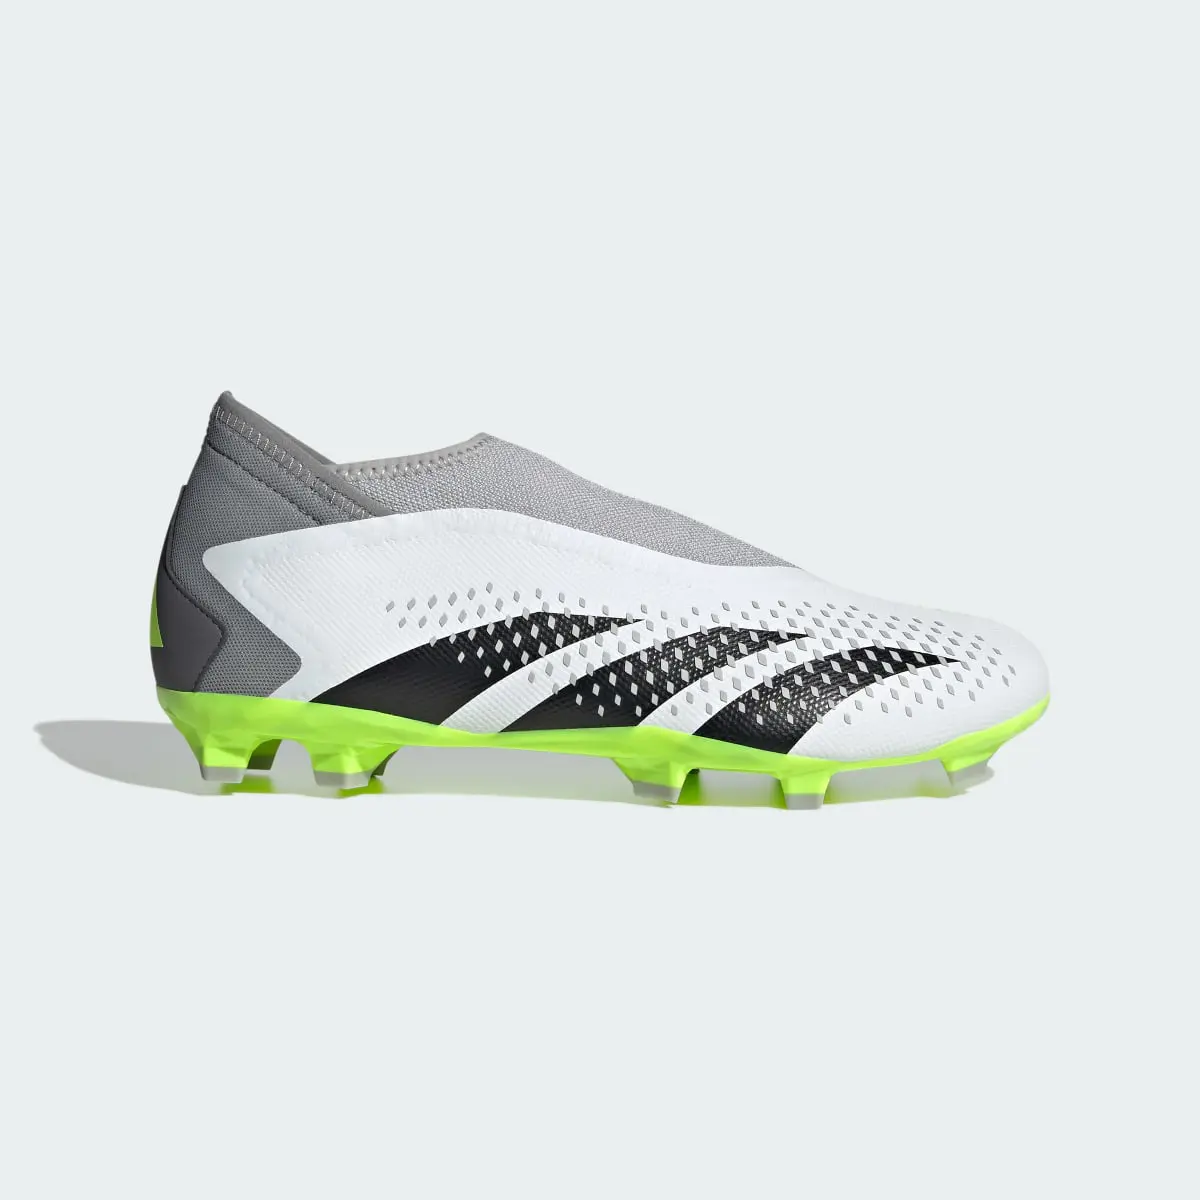 Adidas Predator Accuracy.3 Laceless Firm Ground Boots. 2